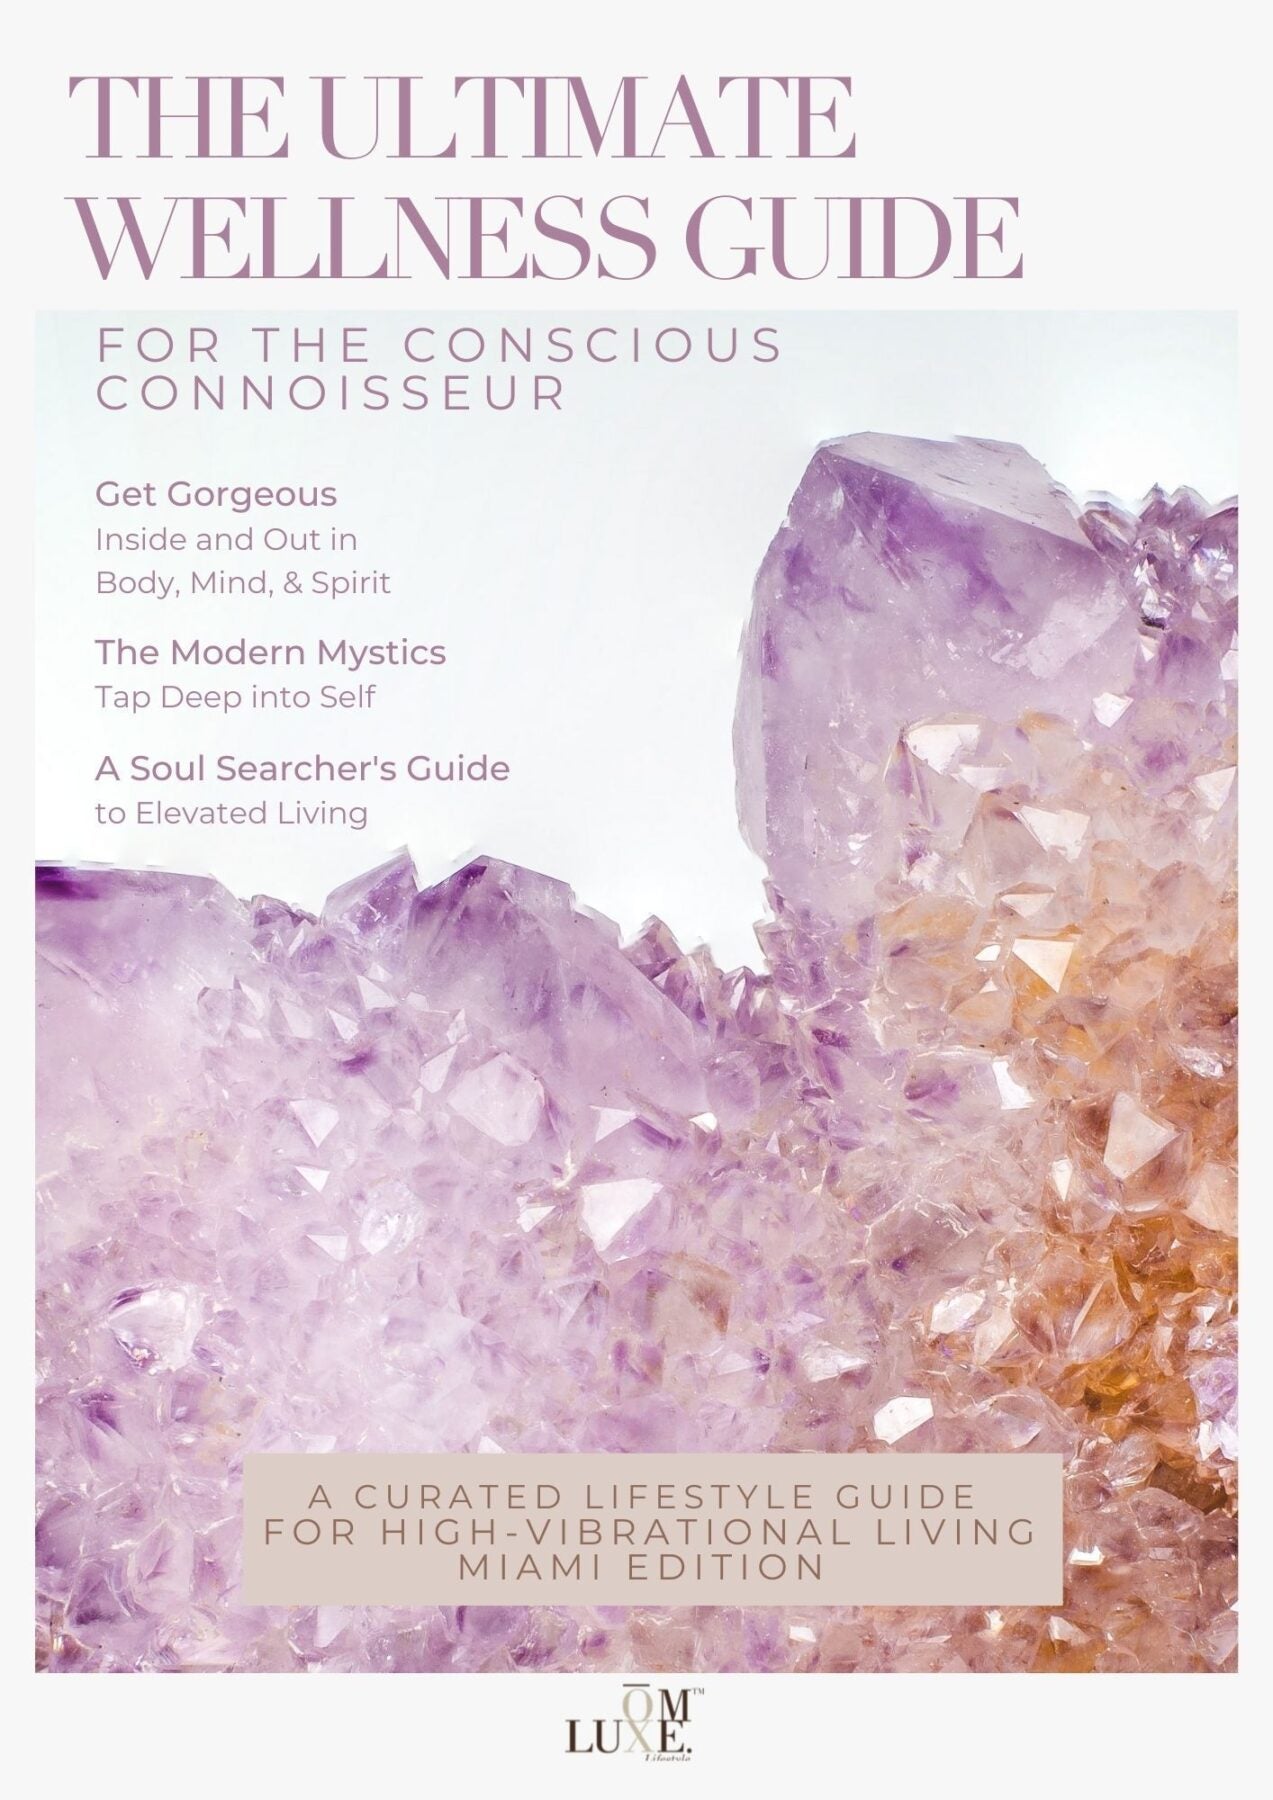 The Ultimate Wellness Guide Book